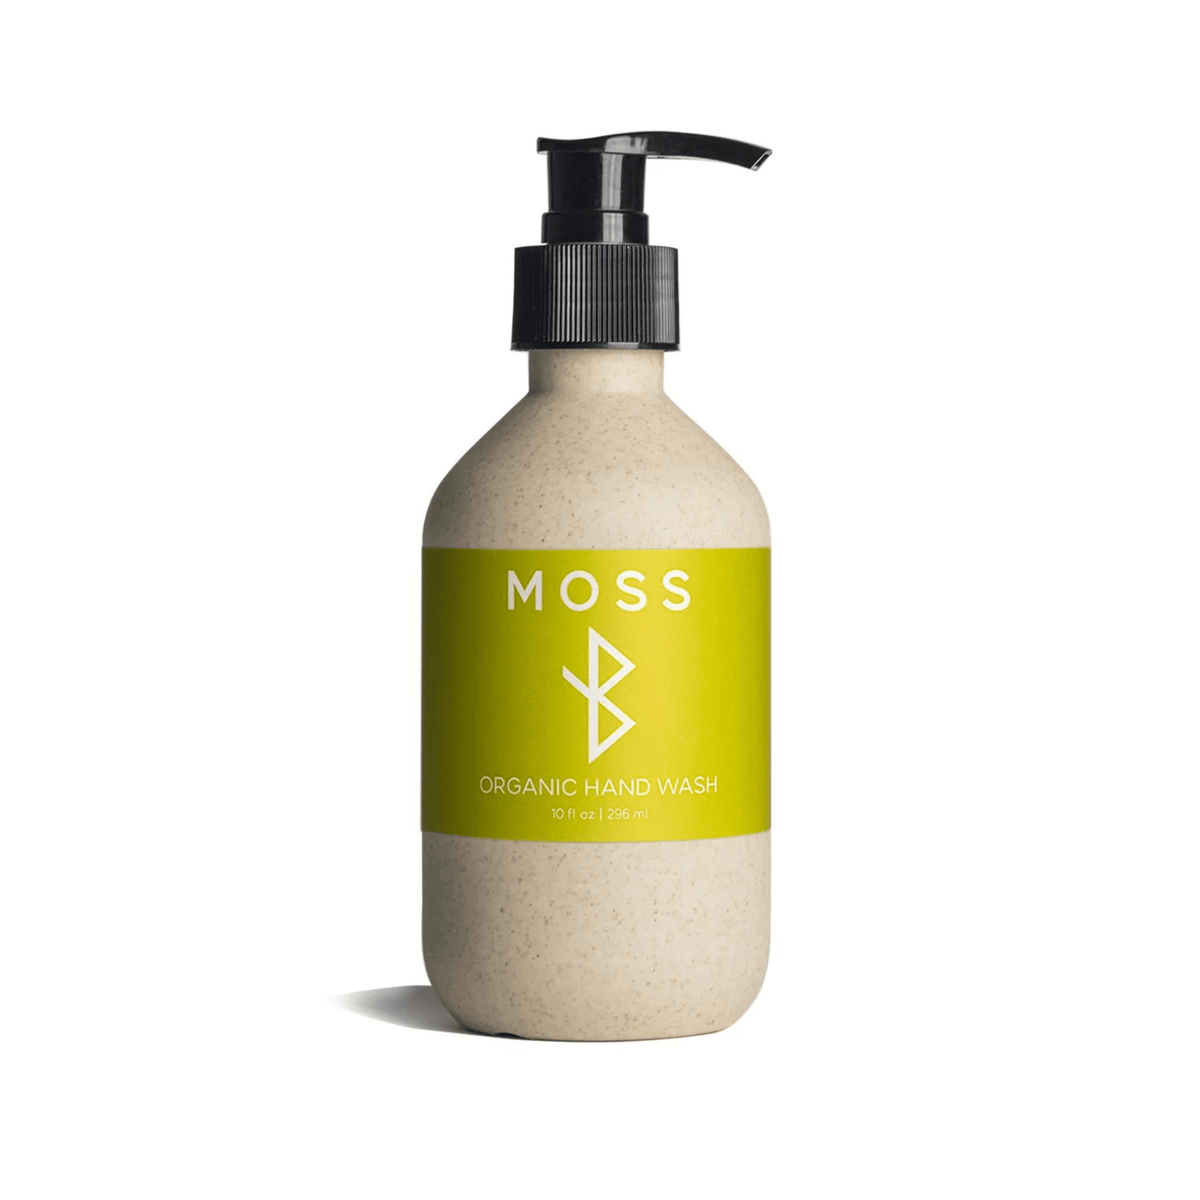 Primary Image of Iceland Moss Hand Wash